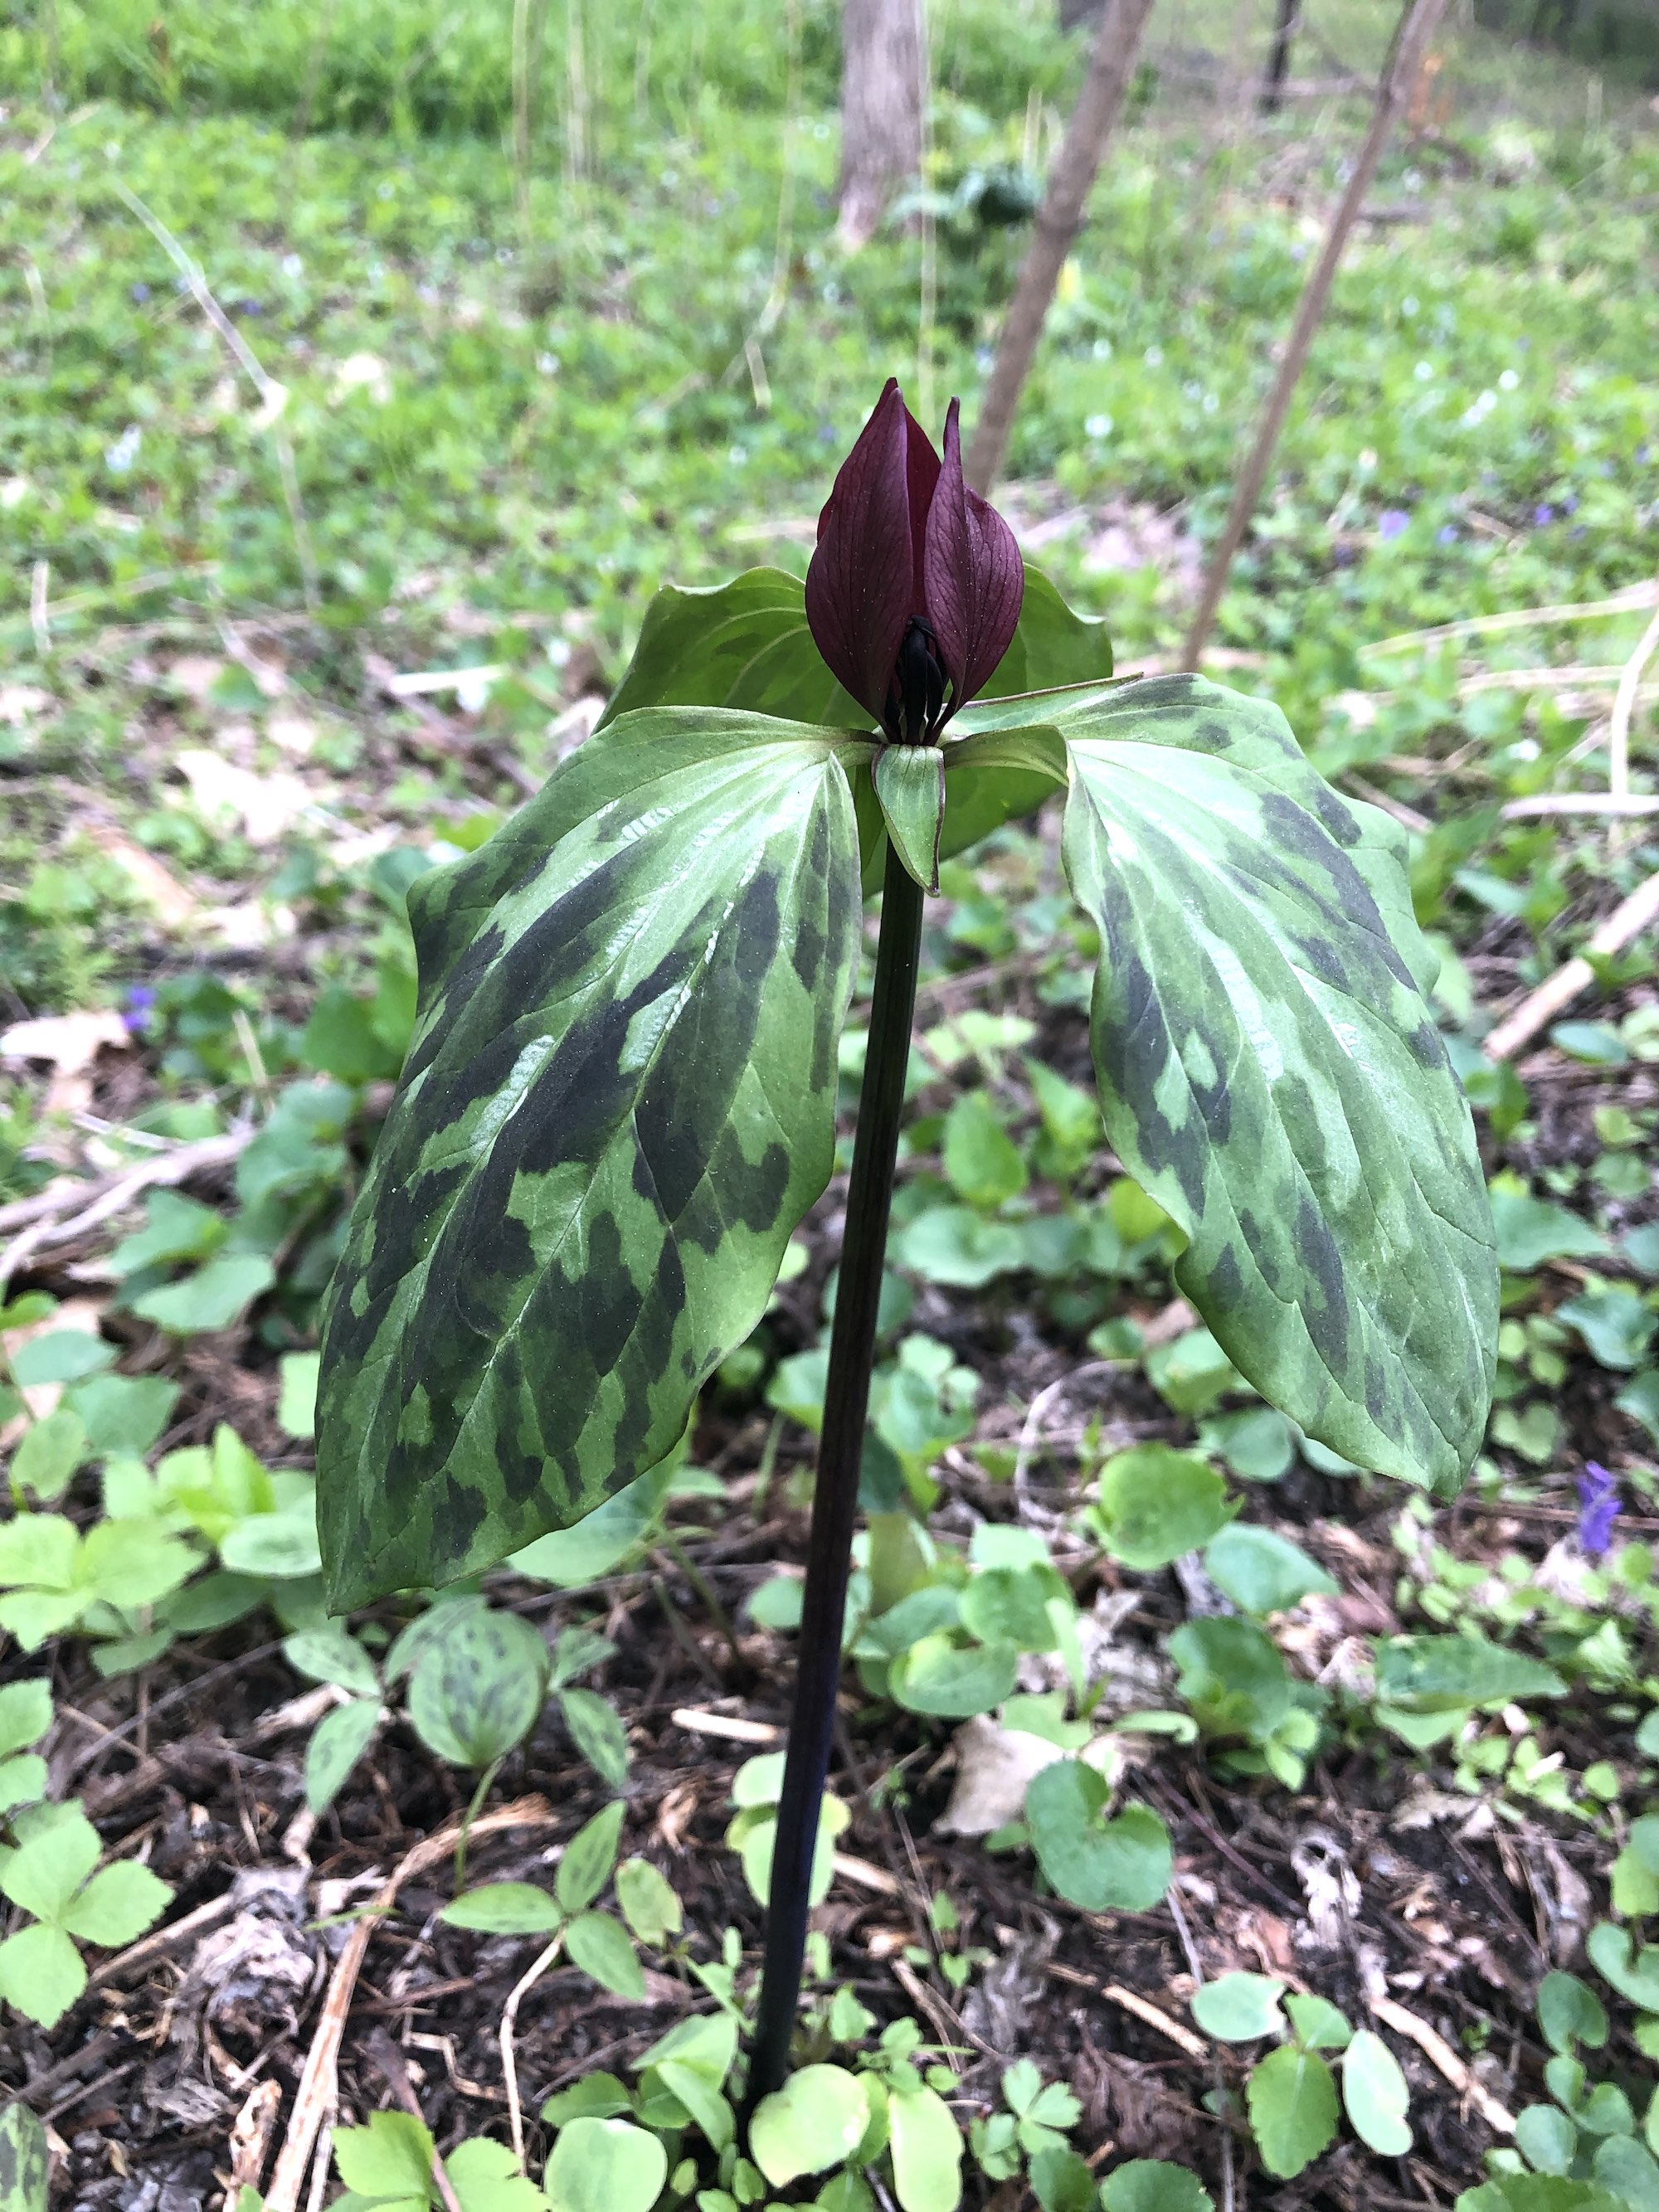 Trillium off of bike path between Marion Dunn and Duck Pond on April 29, 2021.